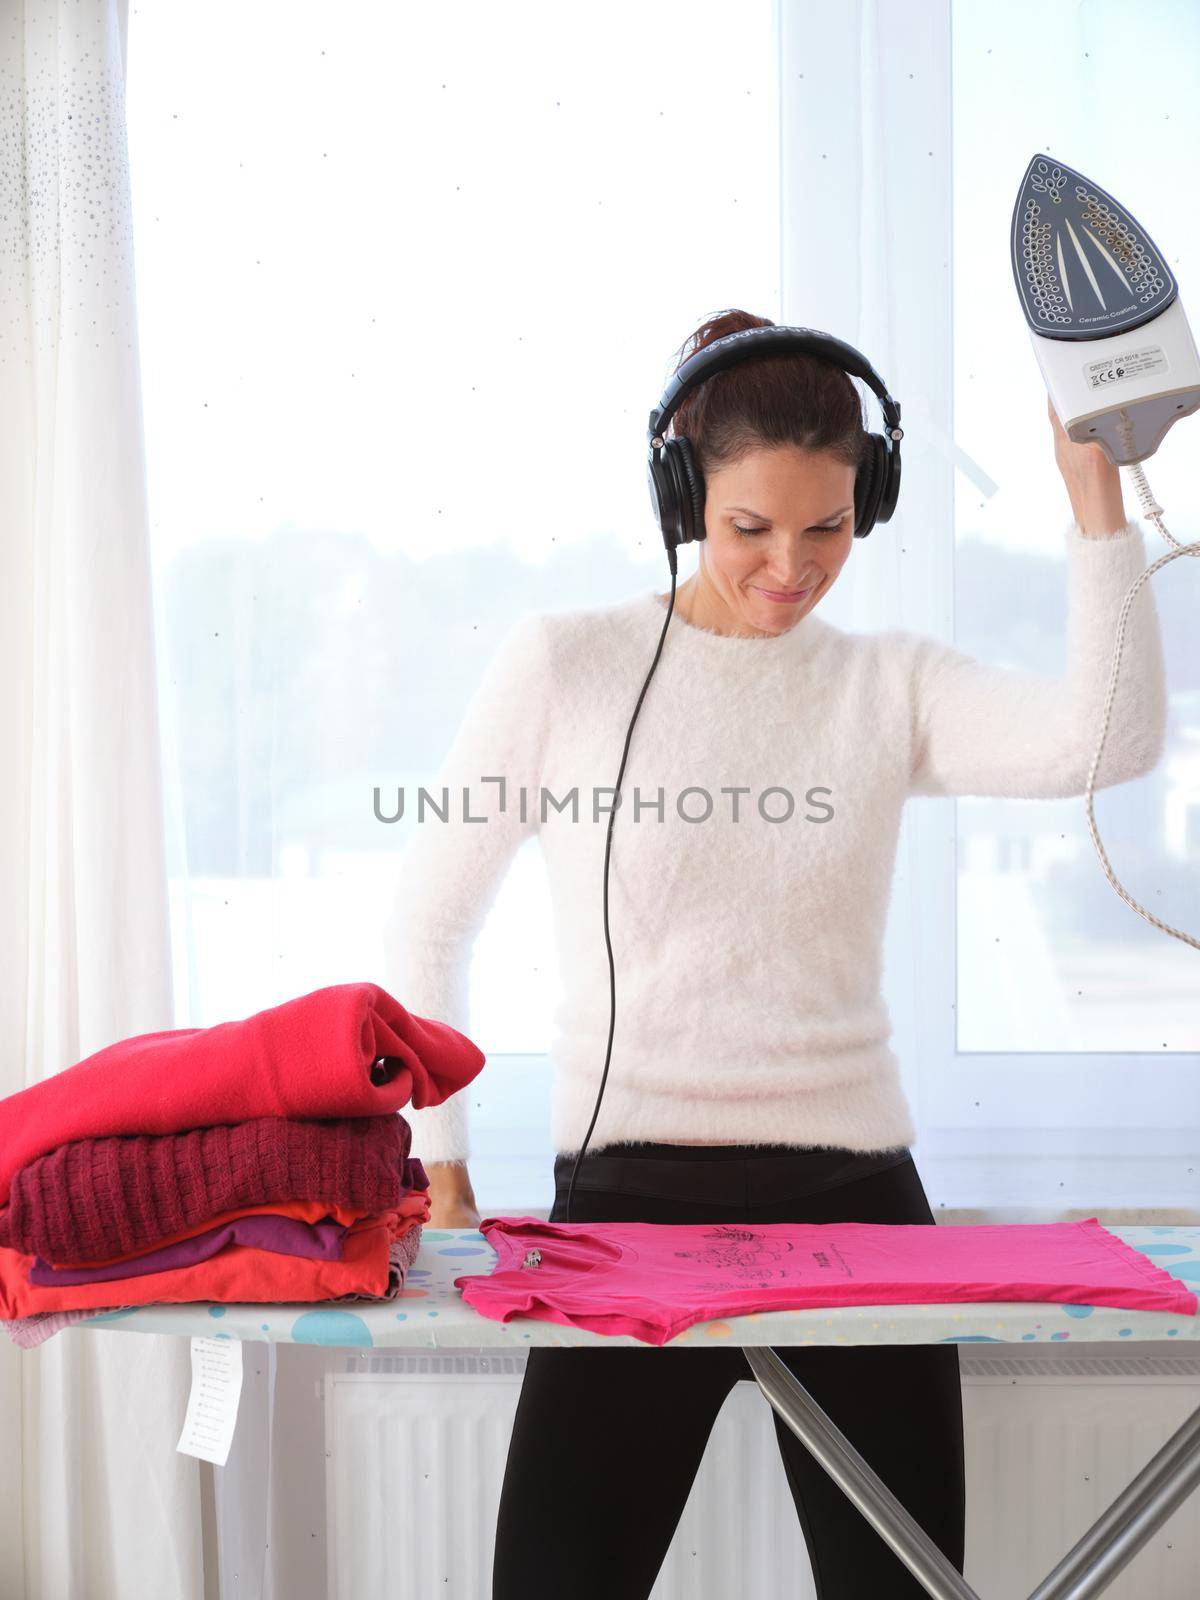 Vertical photo of a happy woman ironing while listening to music on her mobile phone at home